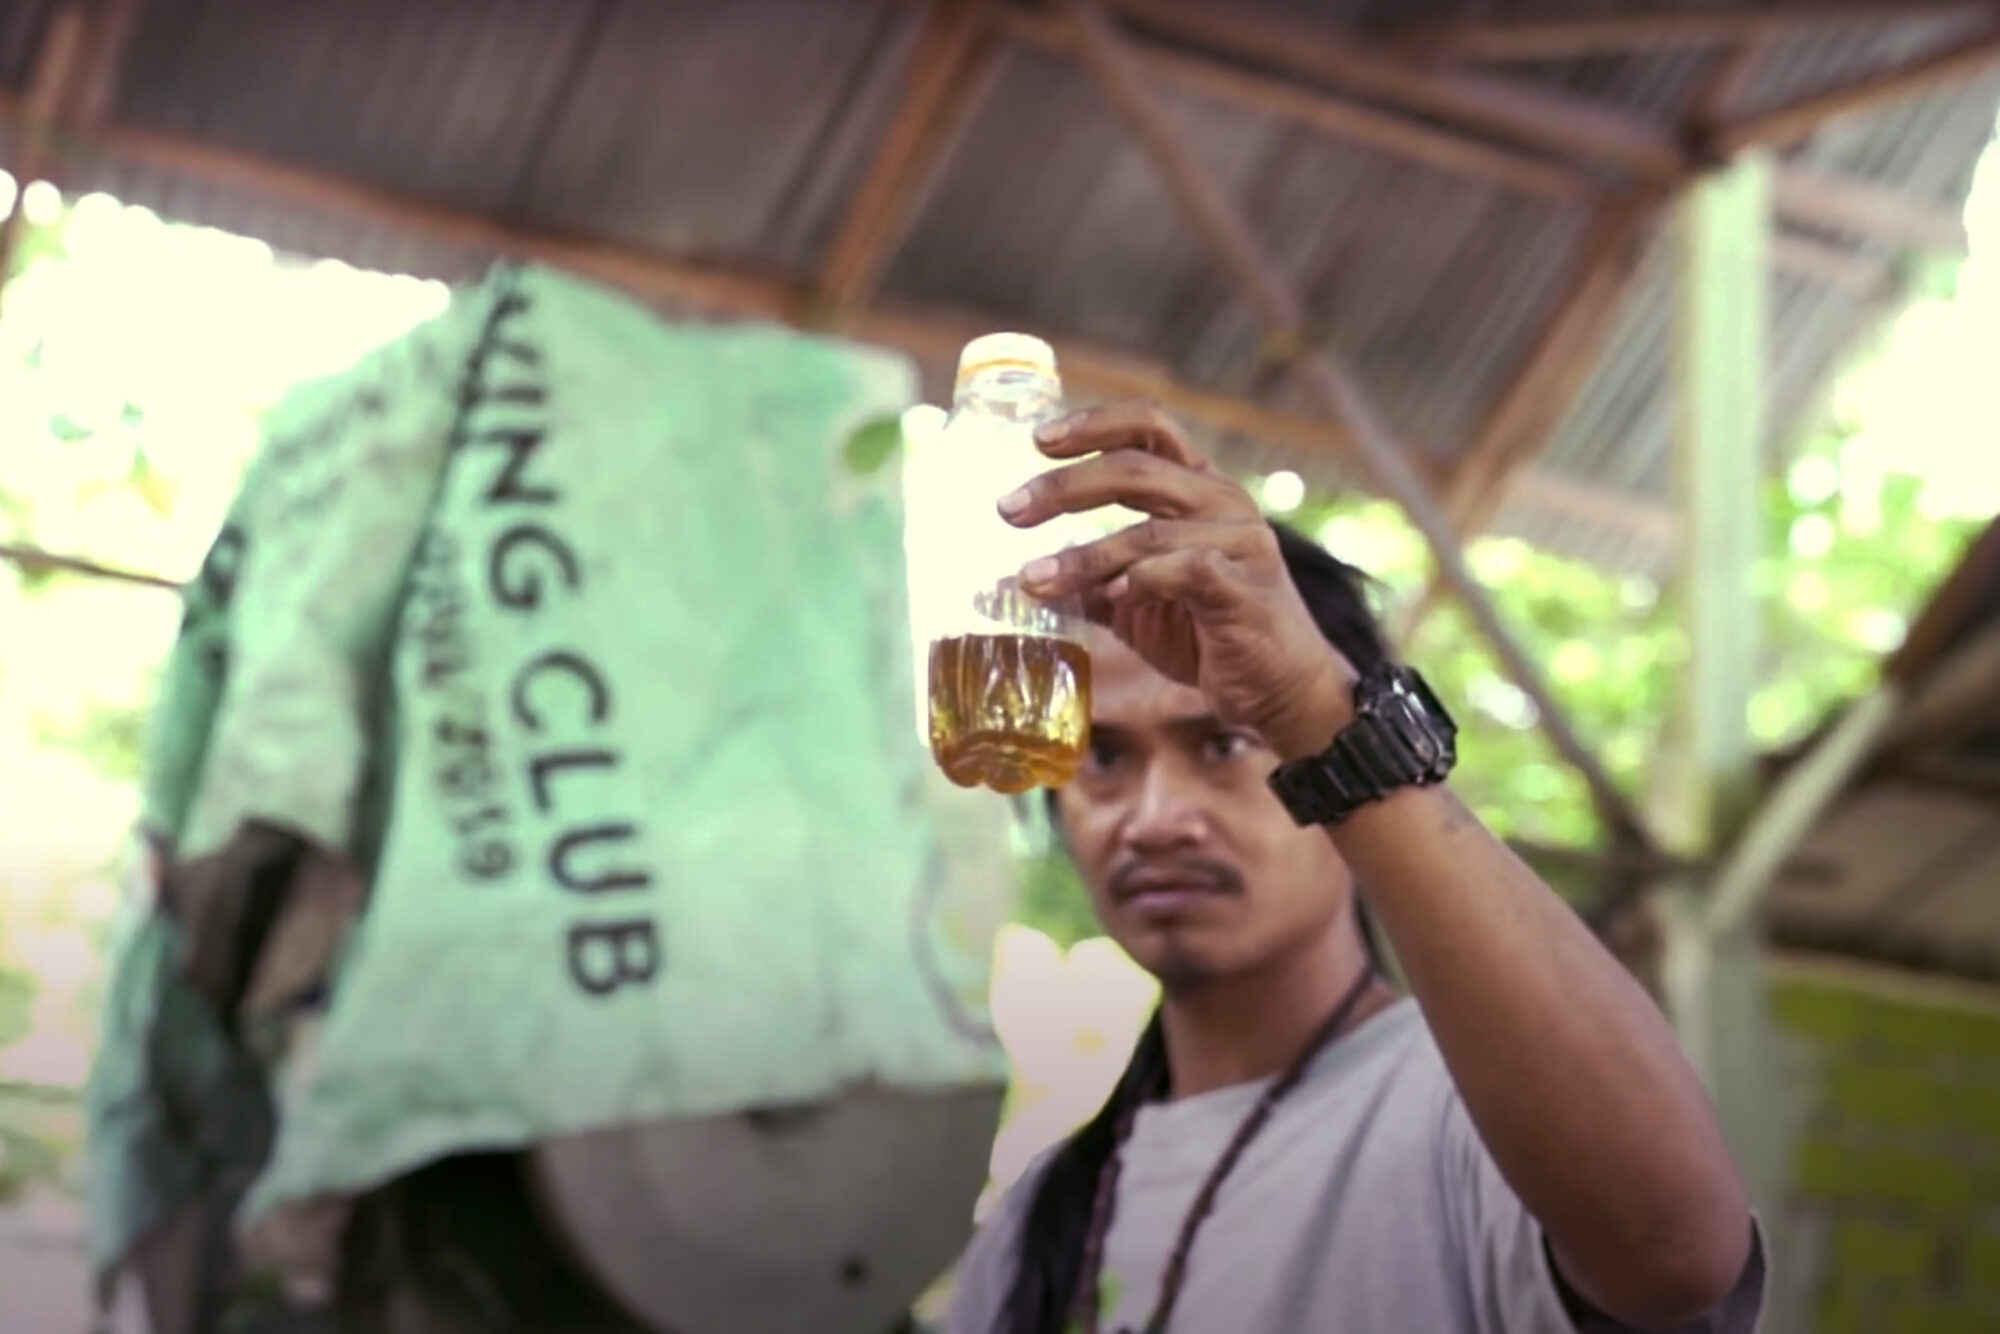 A bottle containing fuel made of plastic waste by Jakarta-based social enterprise Landscape Indonesia